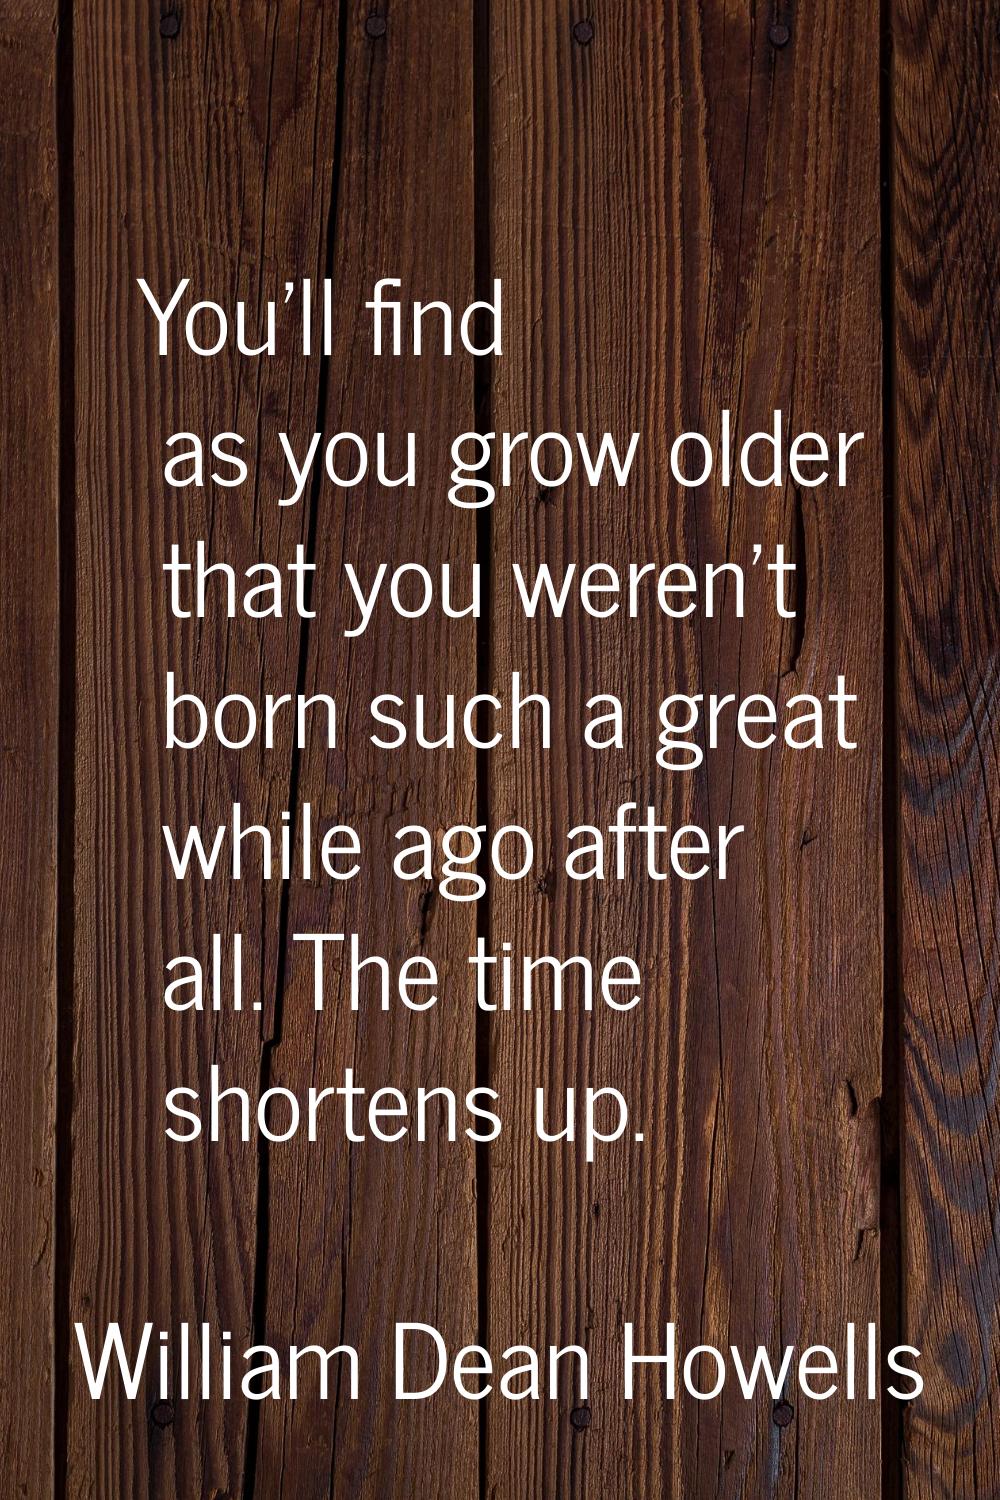 You'll find as you grow older that you weren't born such a great while ago after all. The time shor